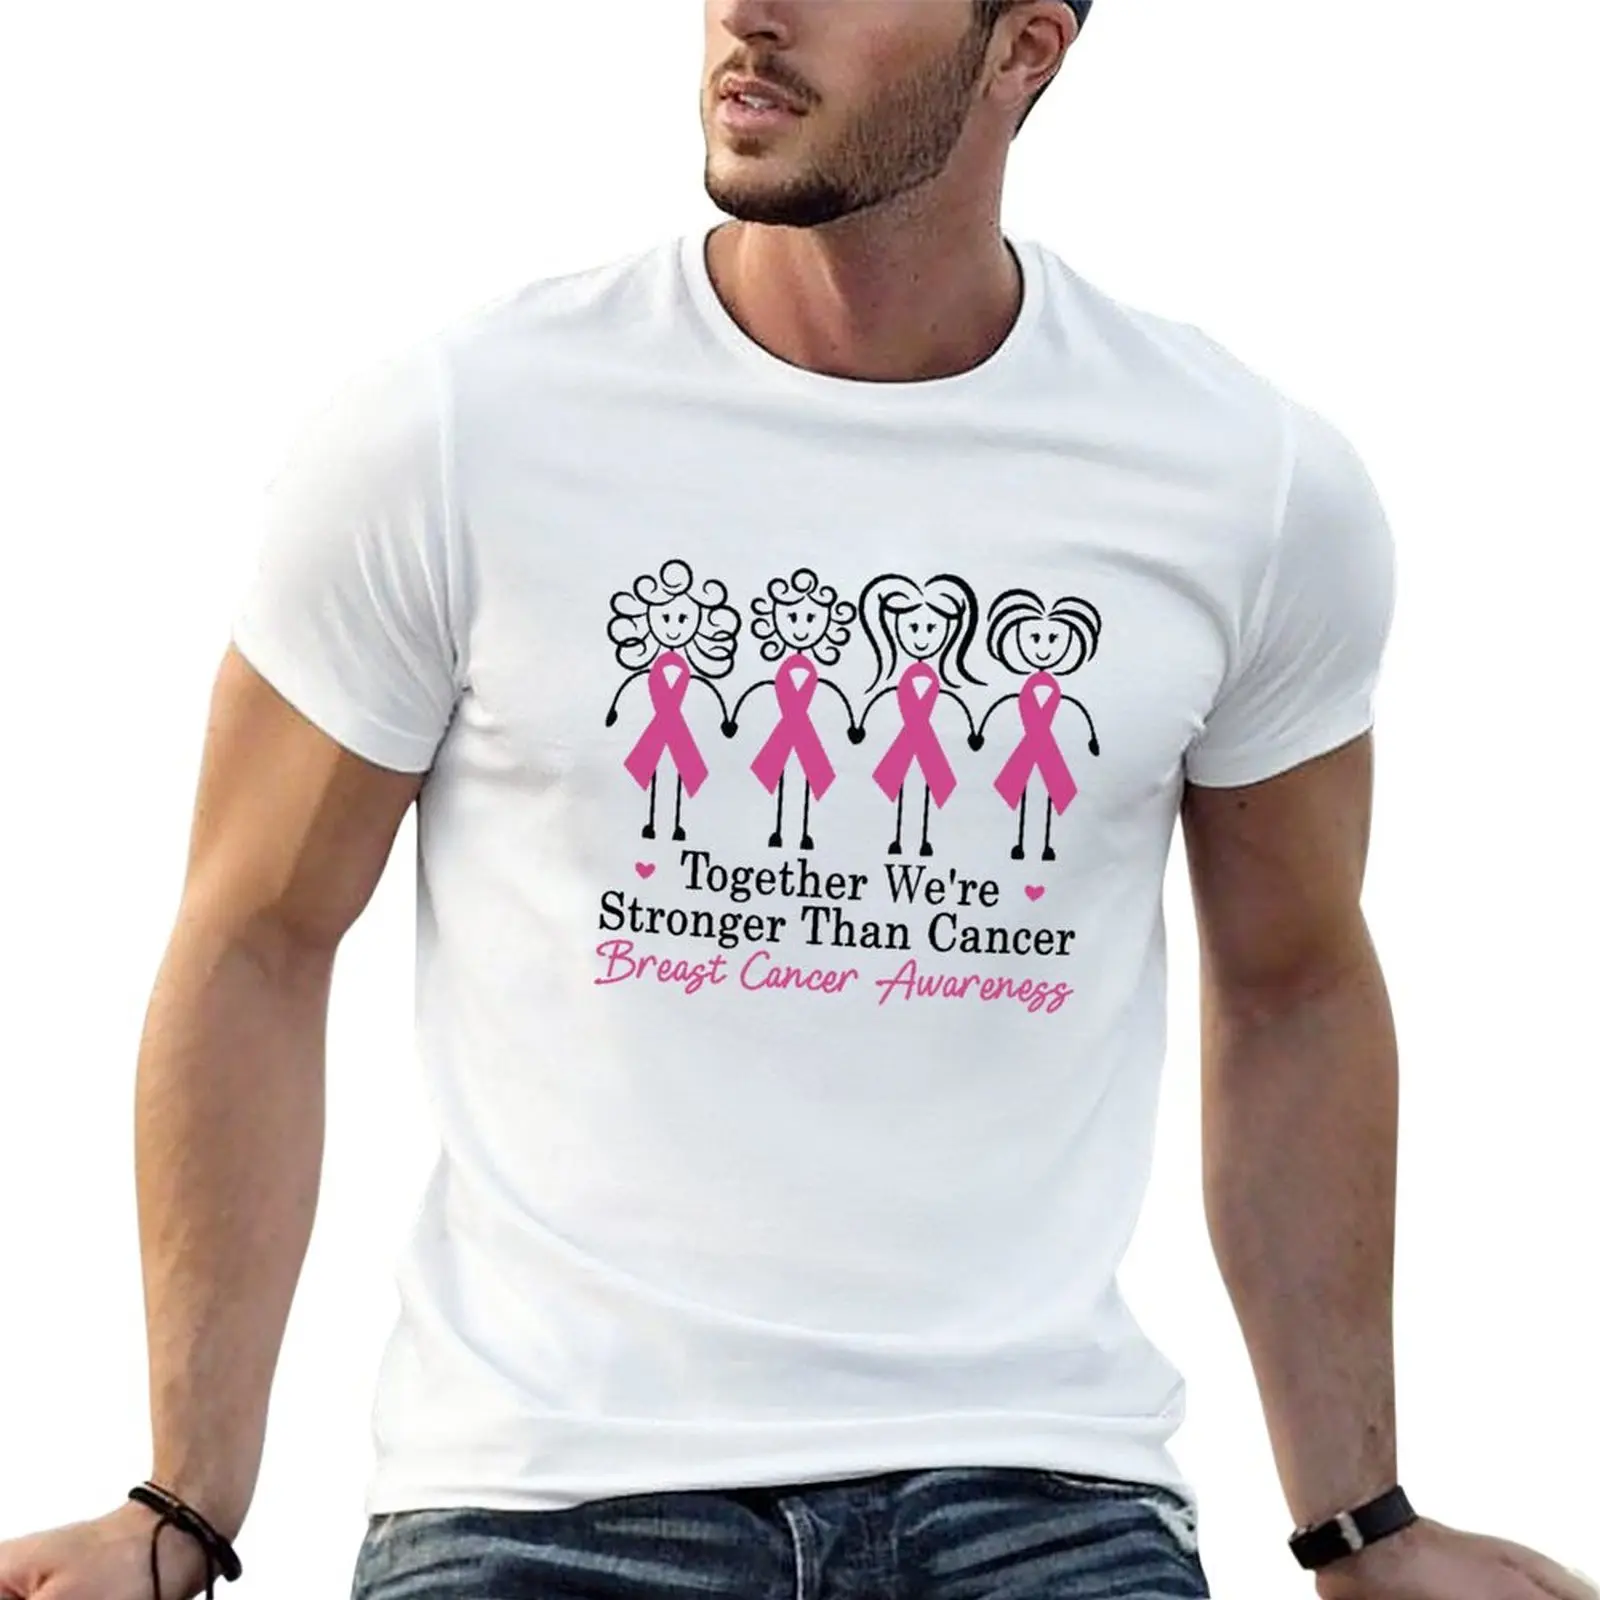 

New Together We're Stronger Than Cancer Ribbon Breast Cancer T-Shirt quick-drying t-shirt Short sleeve tee men